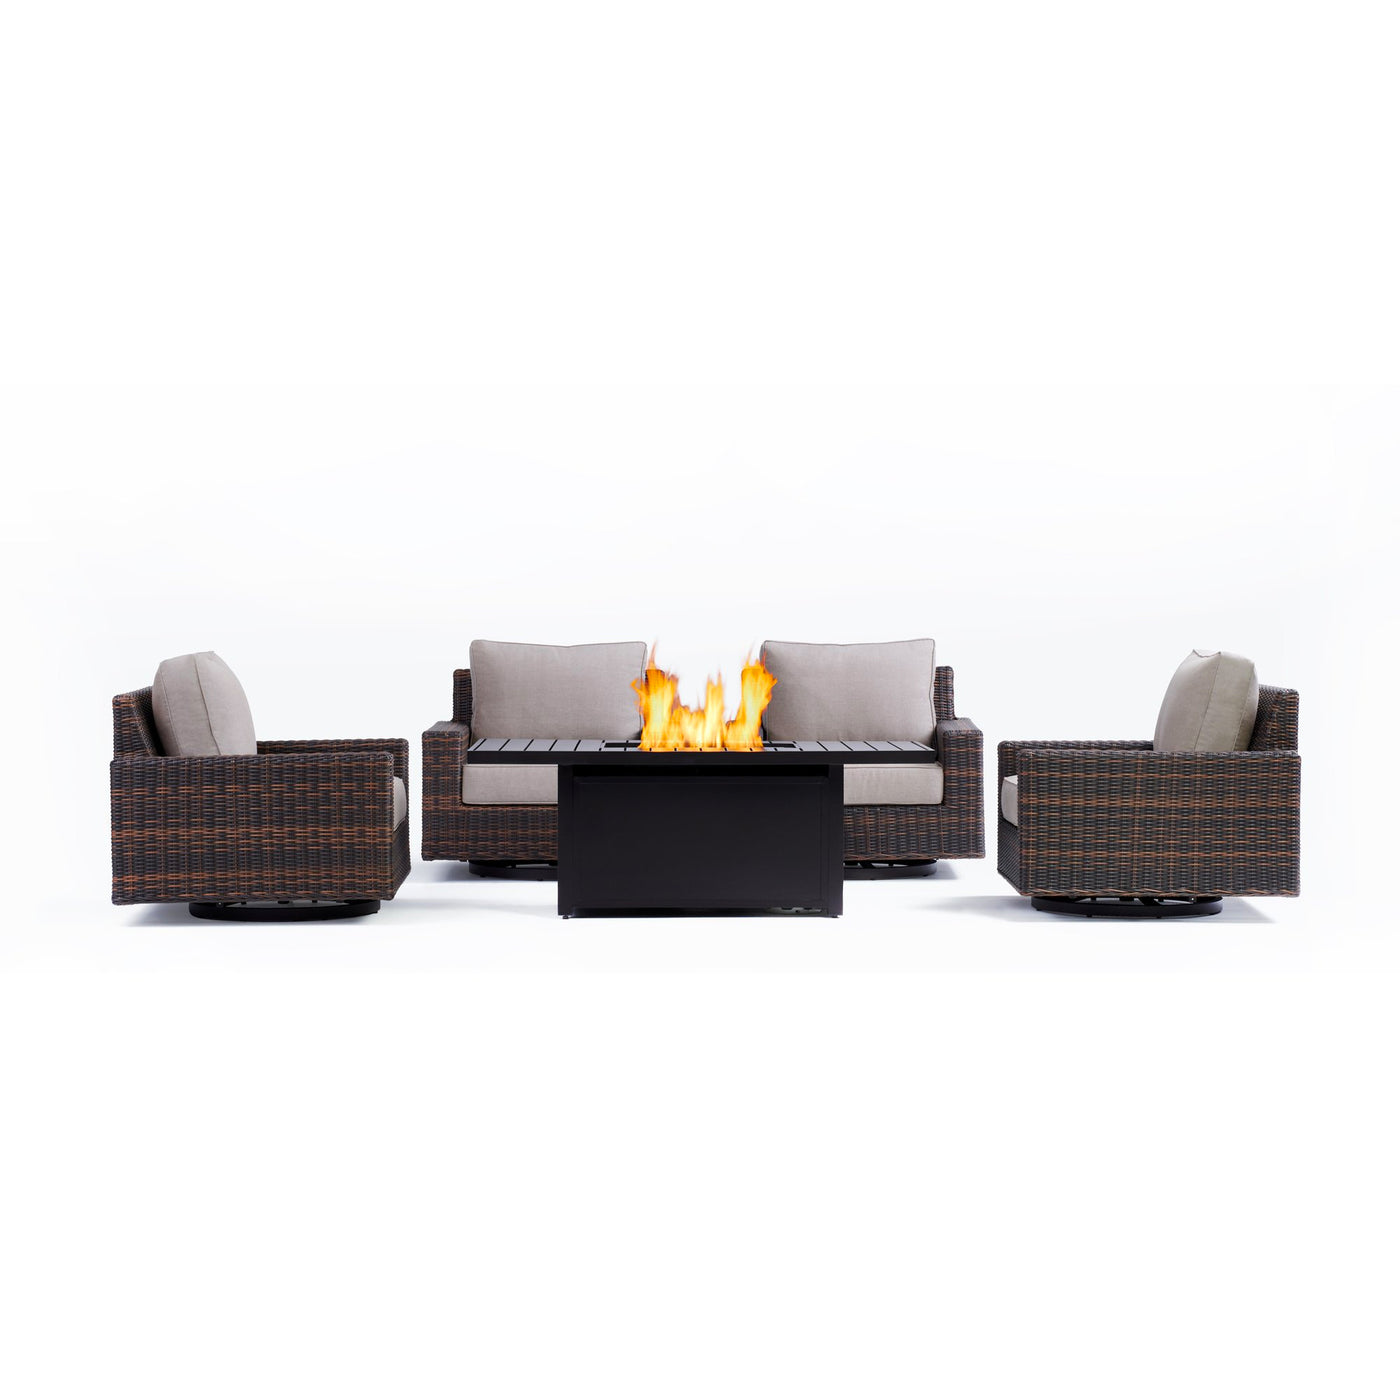 Yardbird Langdon Outdoor Fire Pit Table Set with 4 Swivel Glider Chairs Outdoor Furniture